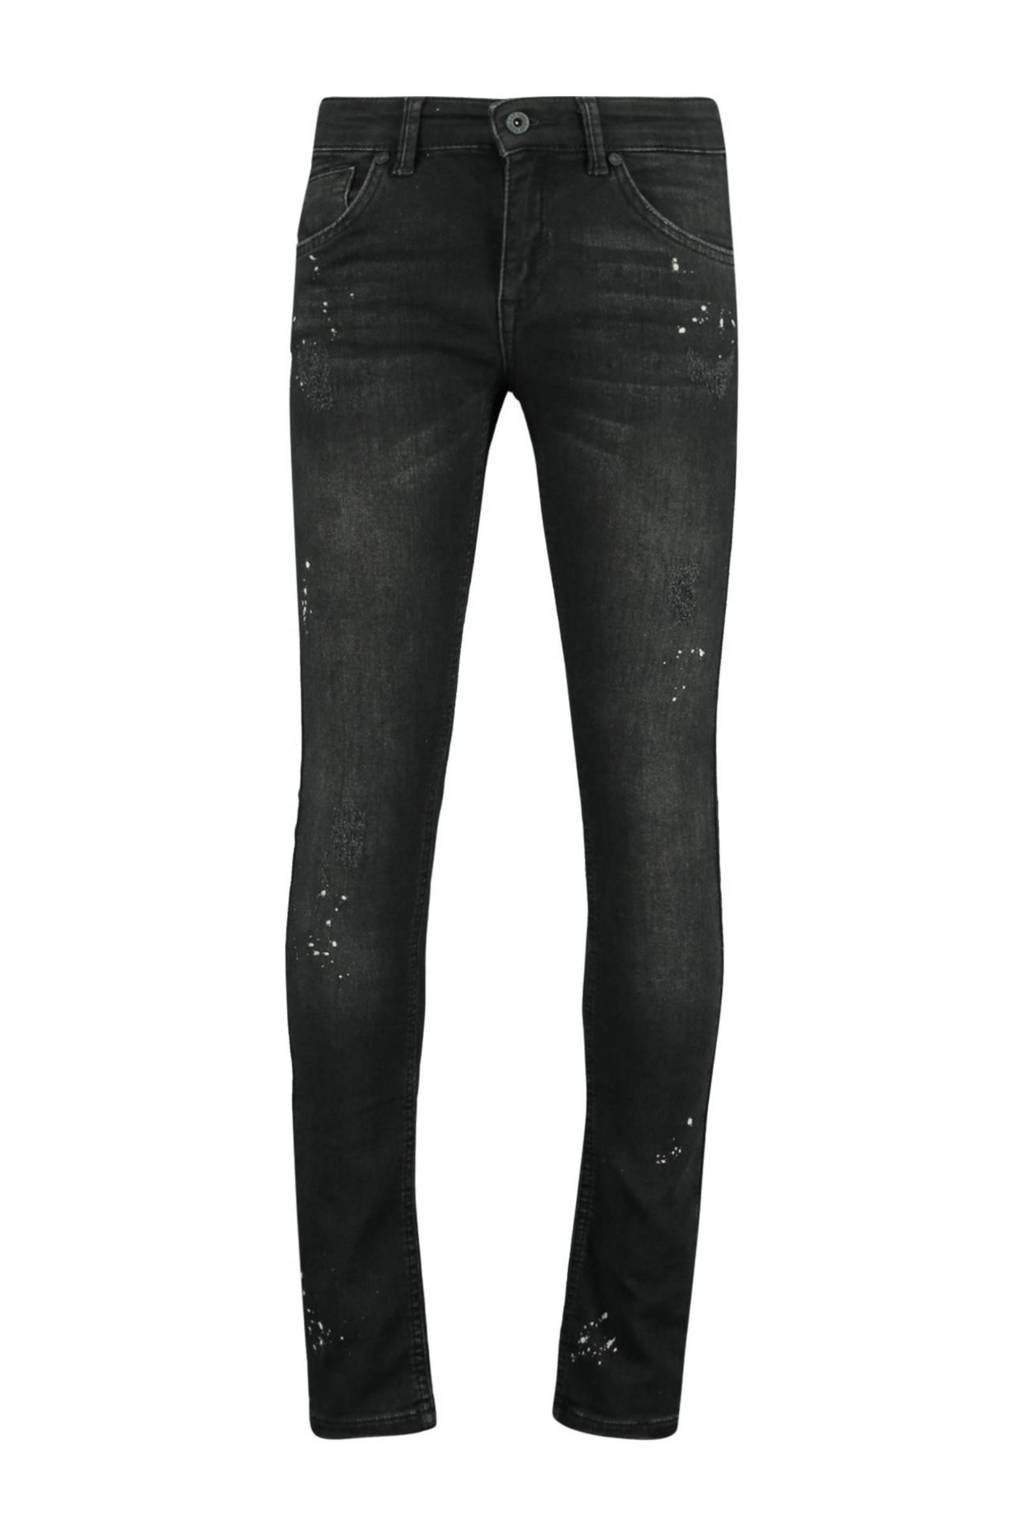 CoolCat Junior tapered fit jeans washed black